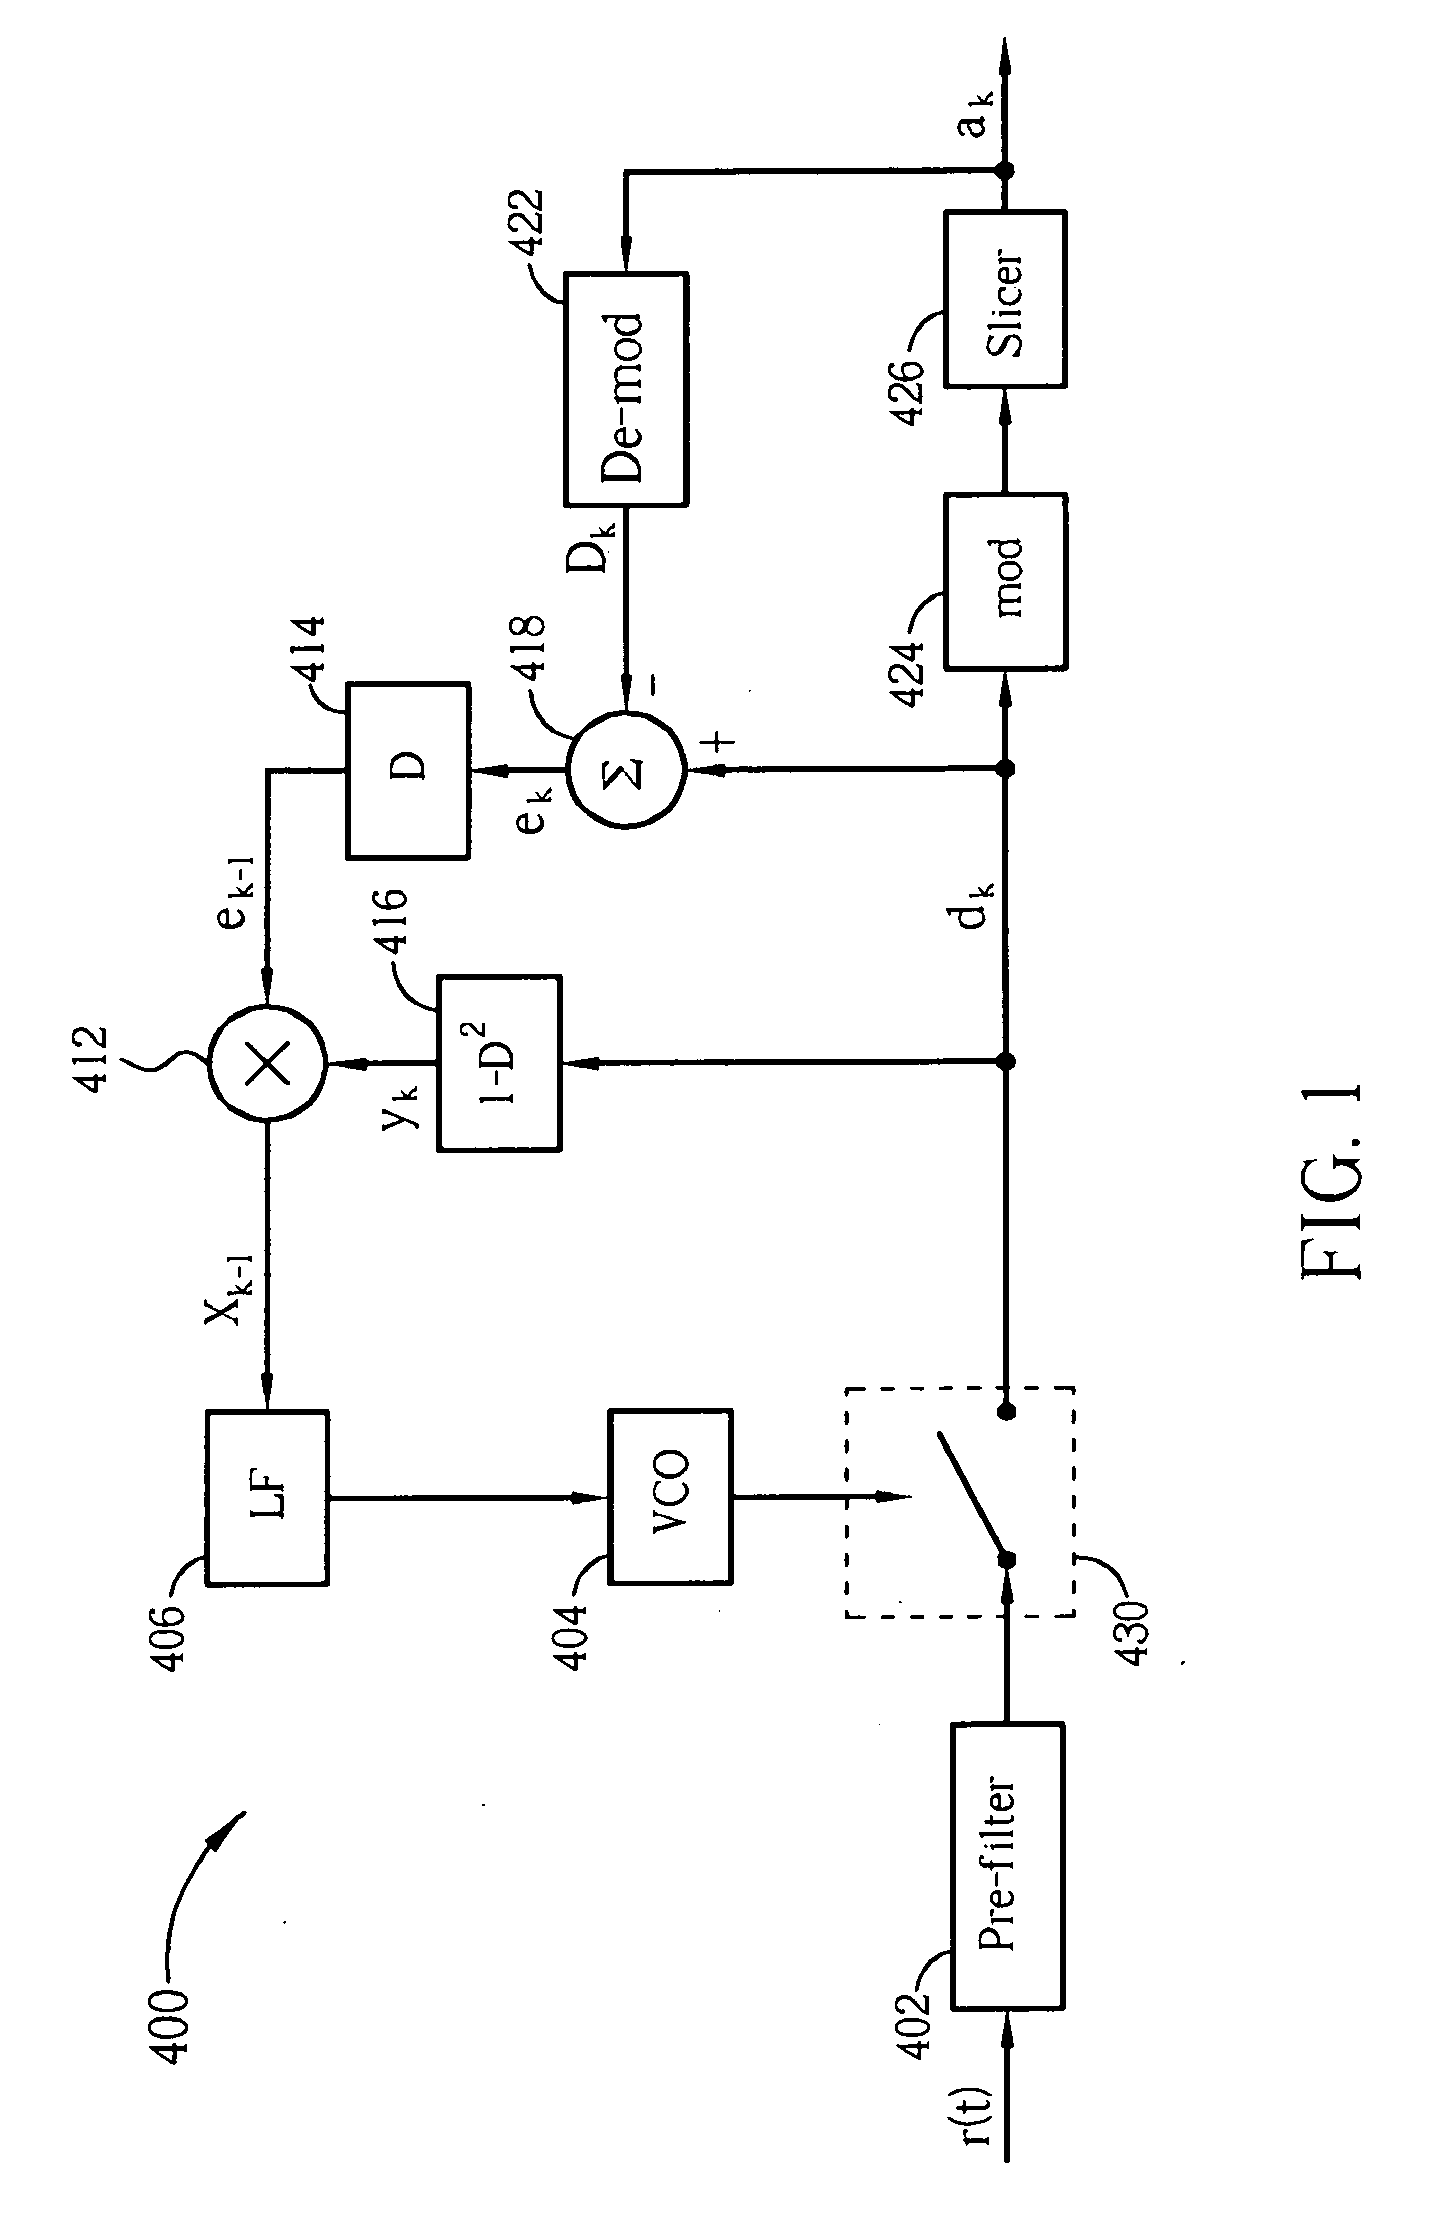 Timing Recovery Circuit and Method Thereof